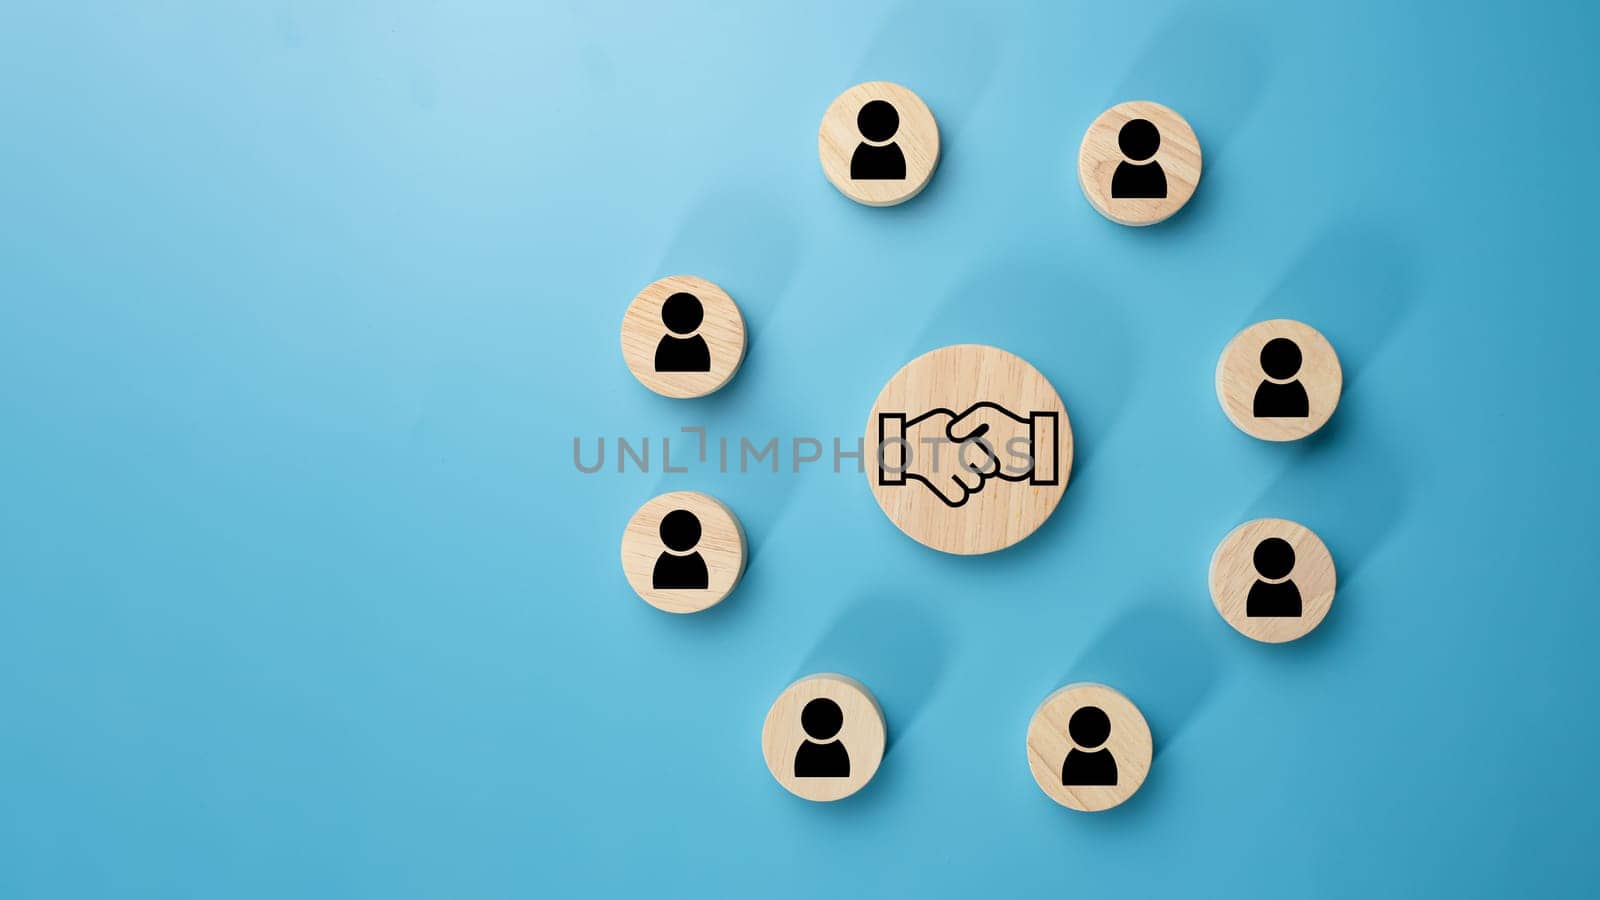 Team management concept, Human resources, Recruitment concept, HRM administration or human resource management concept, The handshake icon in a circular wooden board placed on a light blue background. by Unimages2527